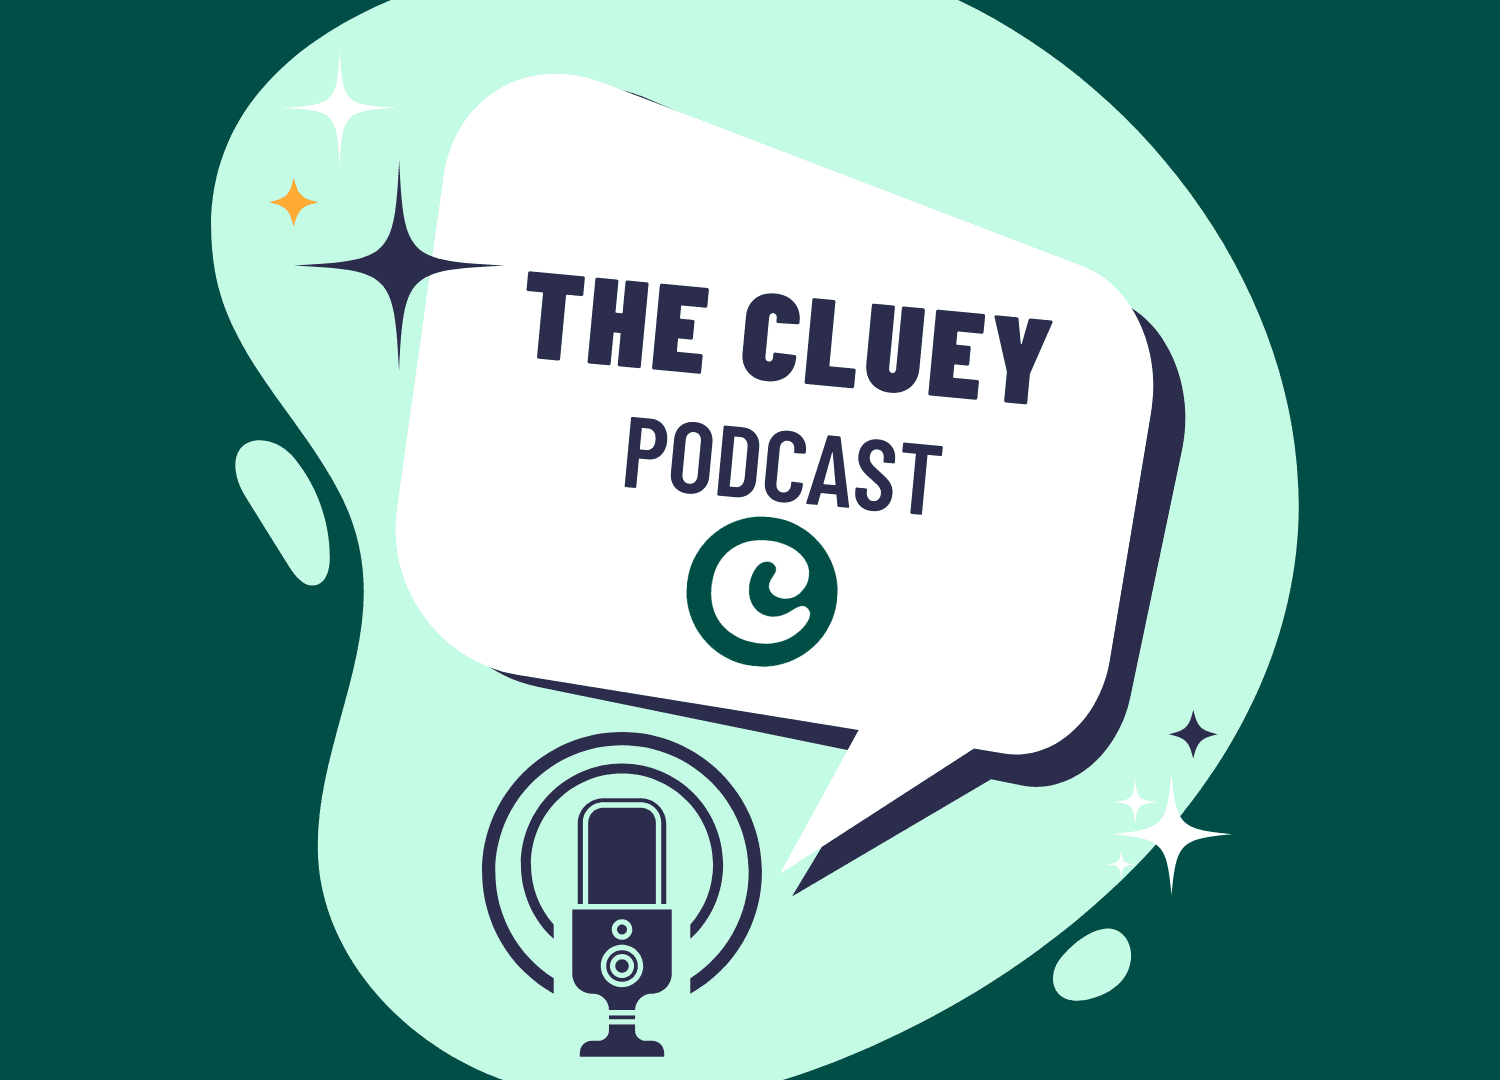 We’re Launching a Podcast!!